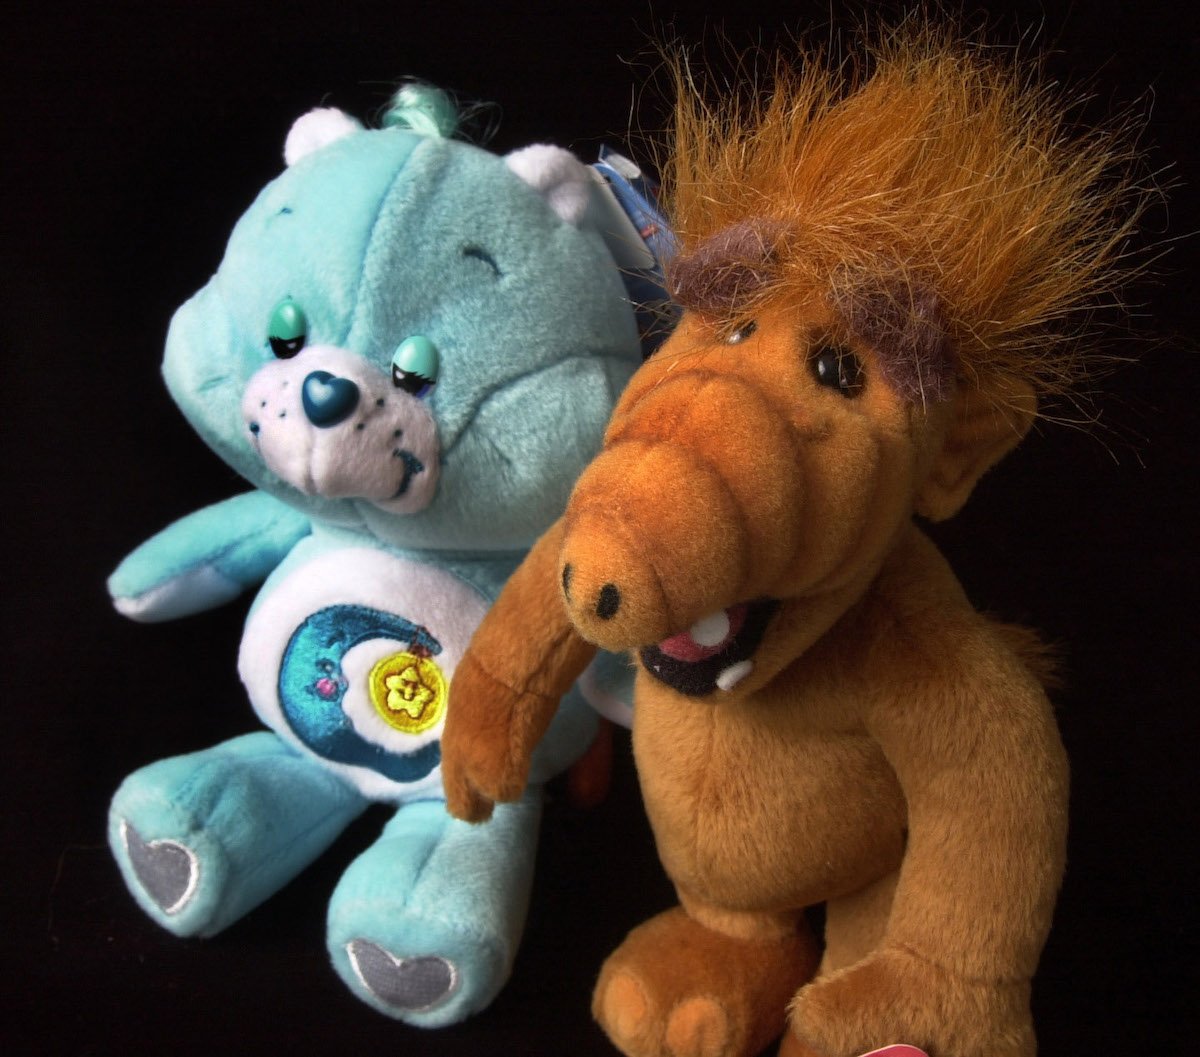 Plush toys reminiscent of the 1980s TV shows featuring the Care Bears and ALF